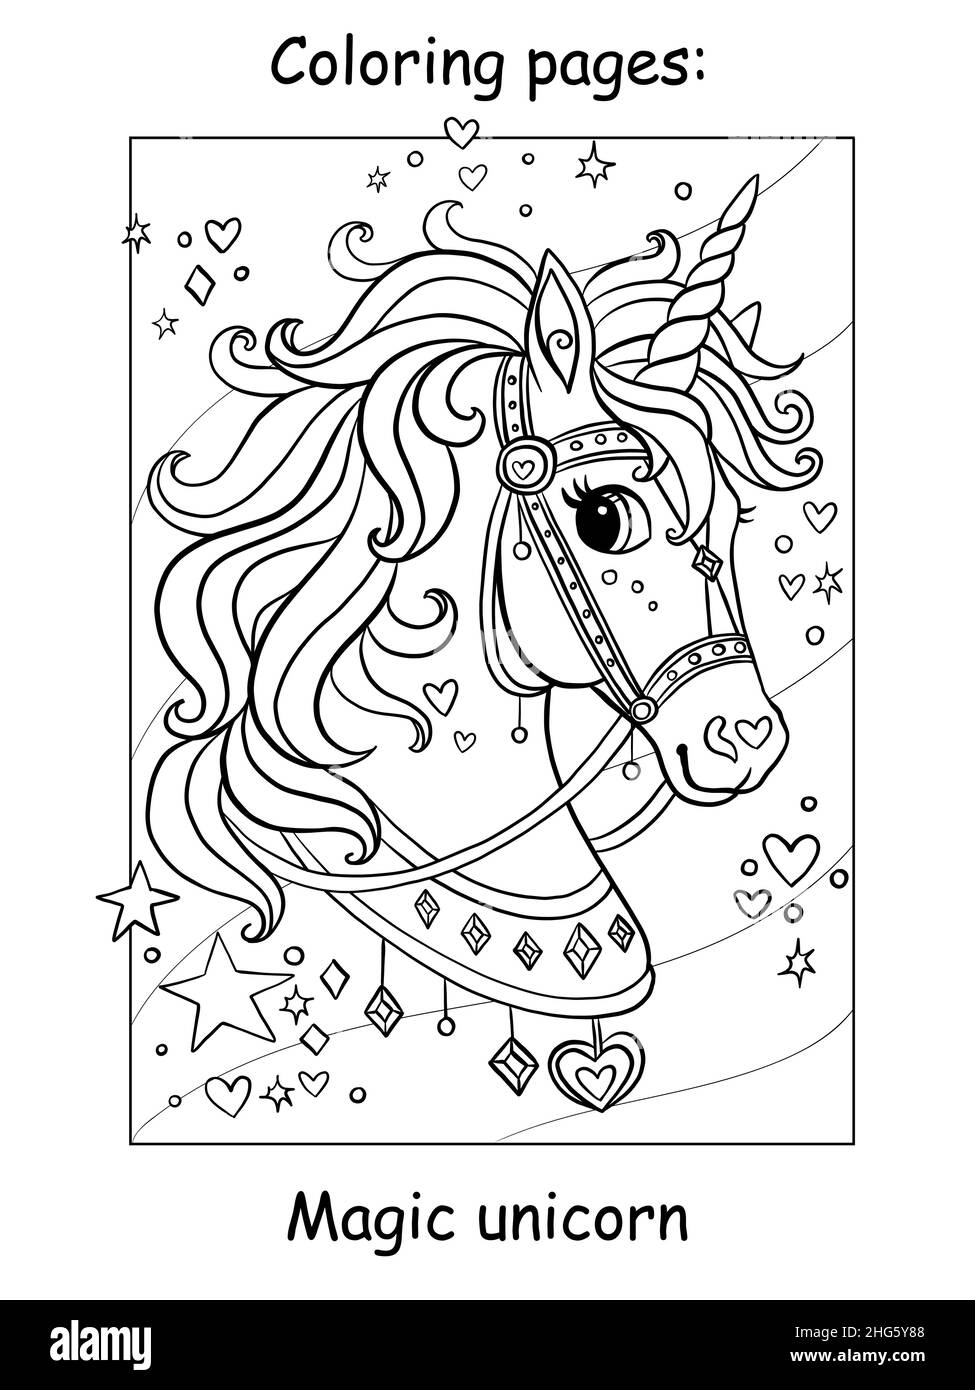 Coloring Page Unicorn High Resolution Stock Photography and Images ...